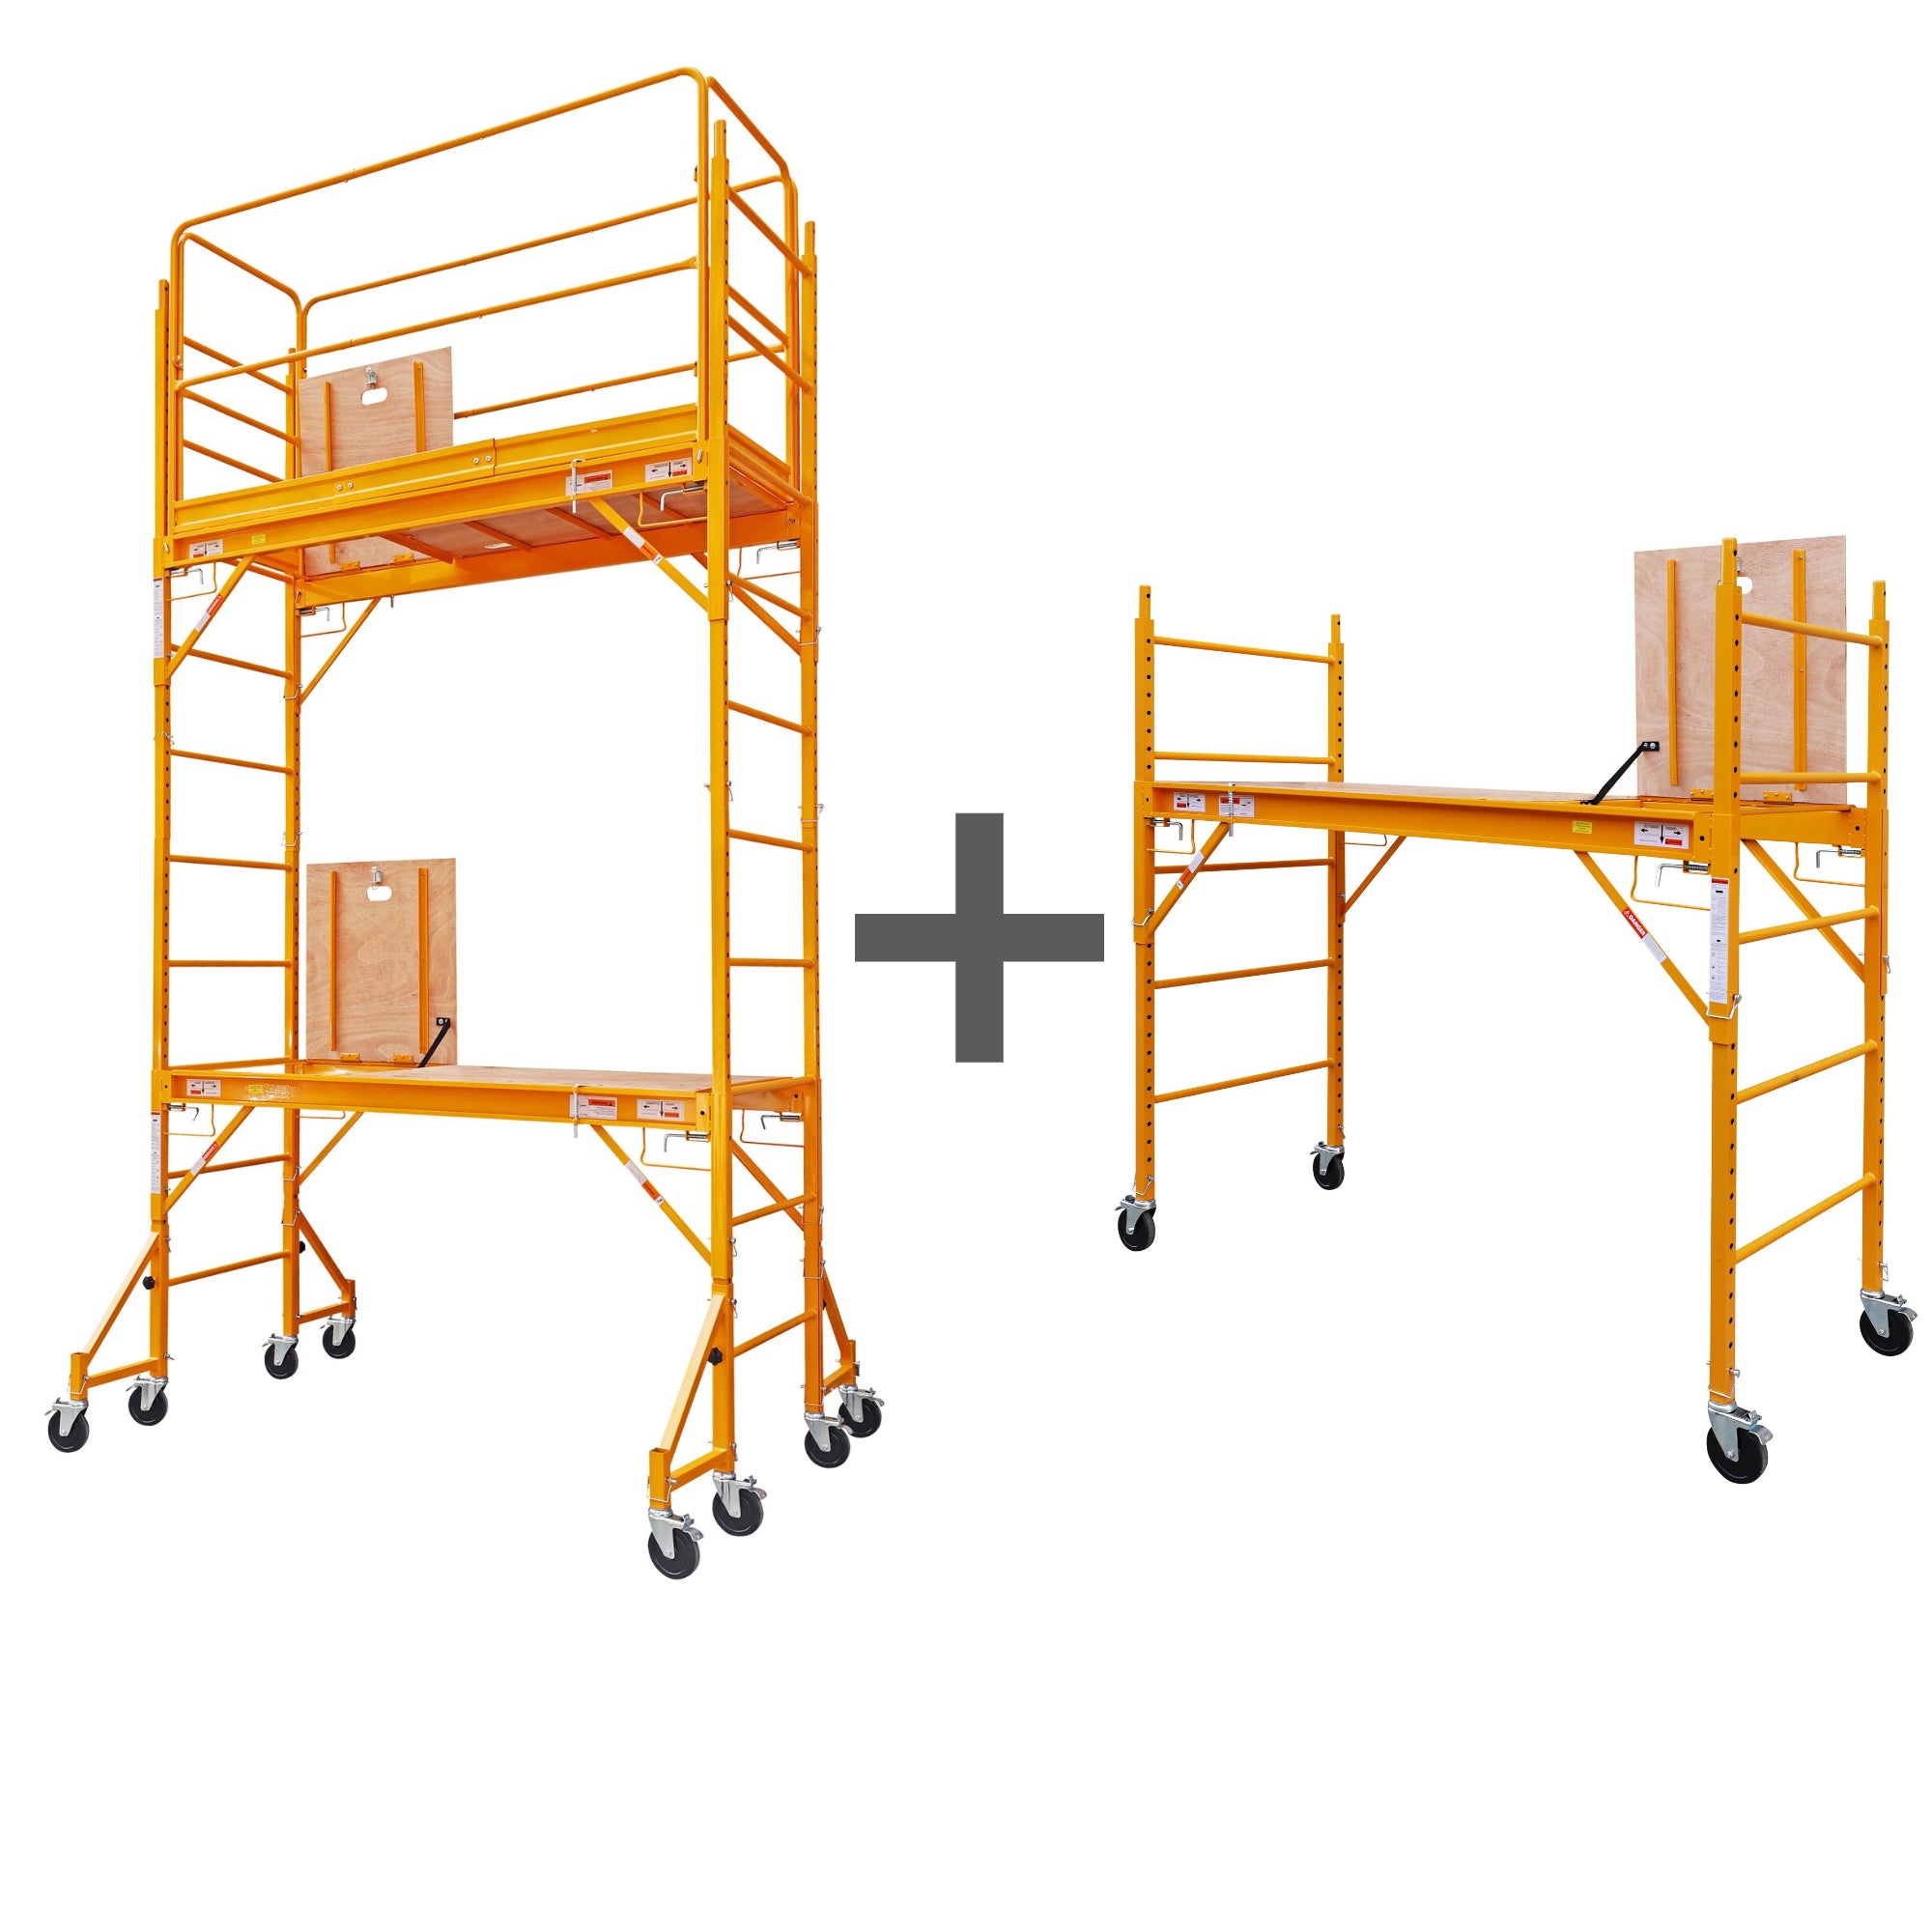 12 foot Hatch Platform Scaffold with safety rails and outiggers + 1- 6 Foot Scaffold